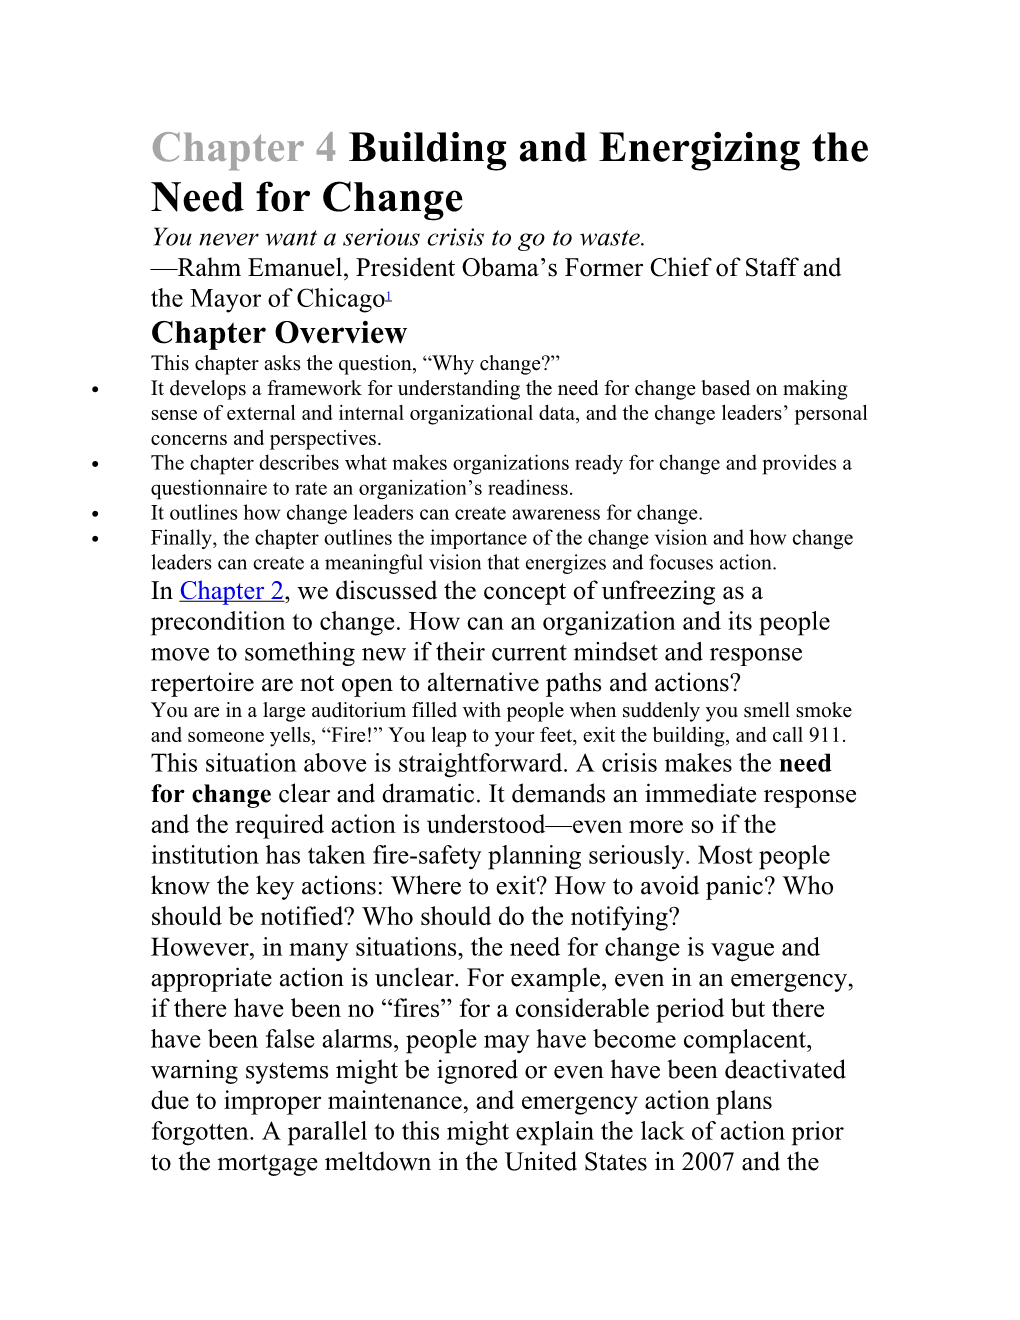 Chapter 4 Building and Energizing the Need for Change